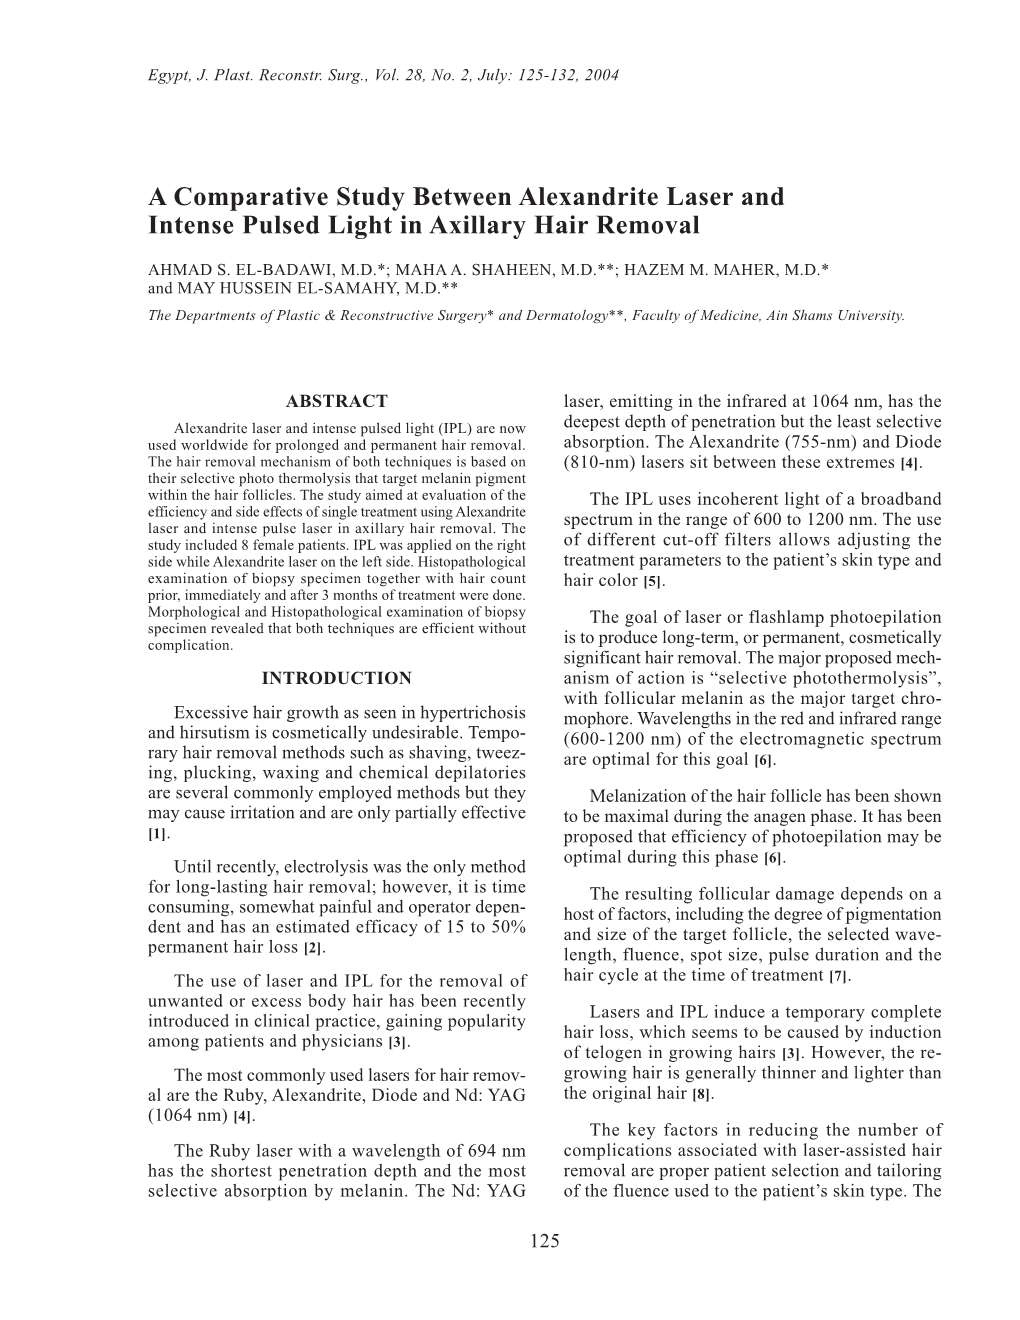 A Comparative Study Between Alexandrite Laser and Intense Pulsed Light in Axillary Hair Removal